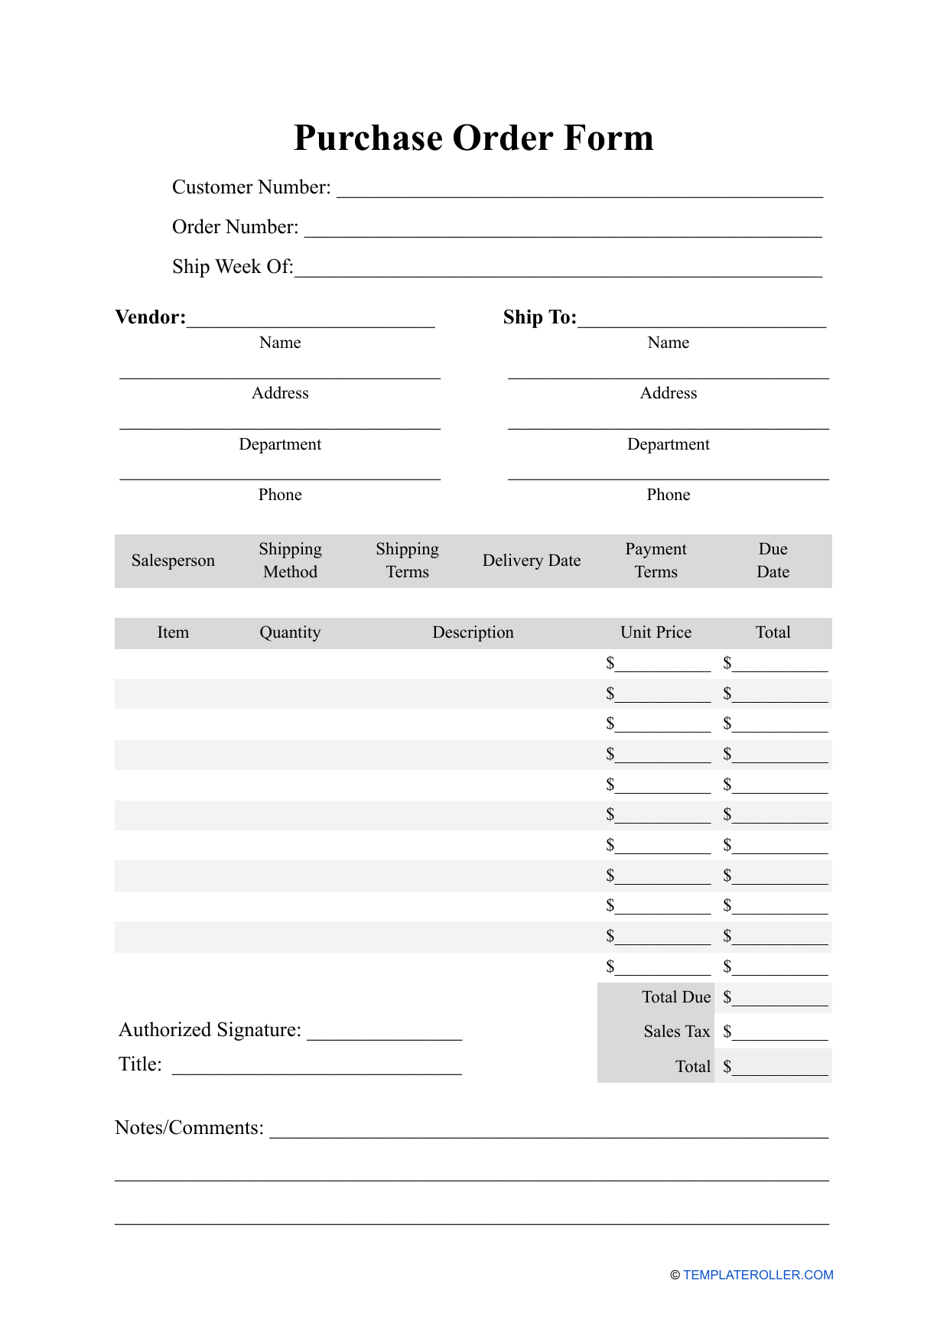 Purchase Order Form Template, Page 1